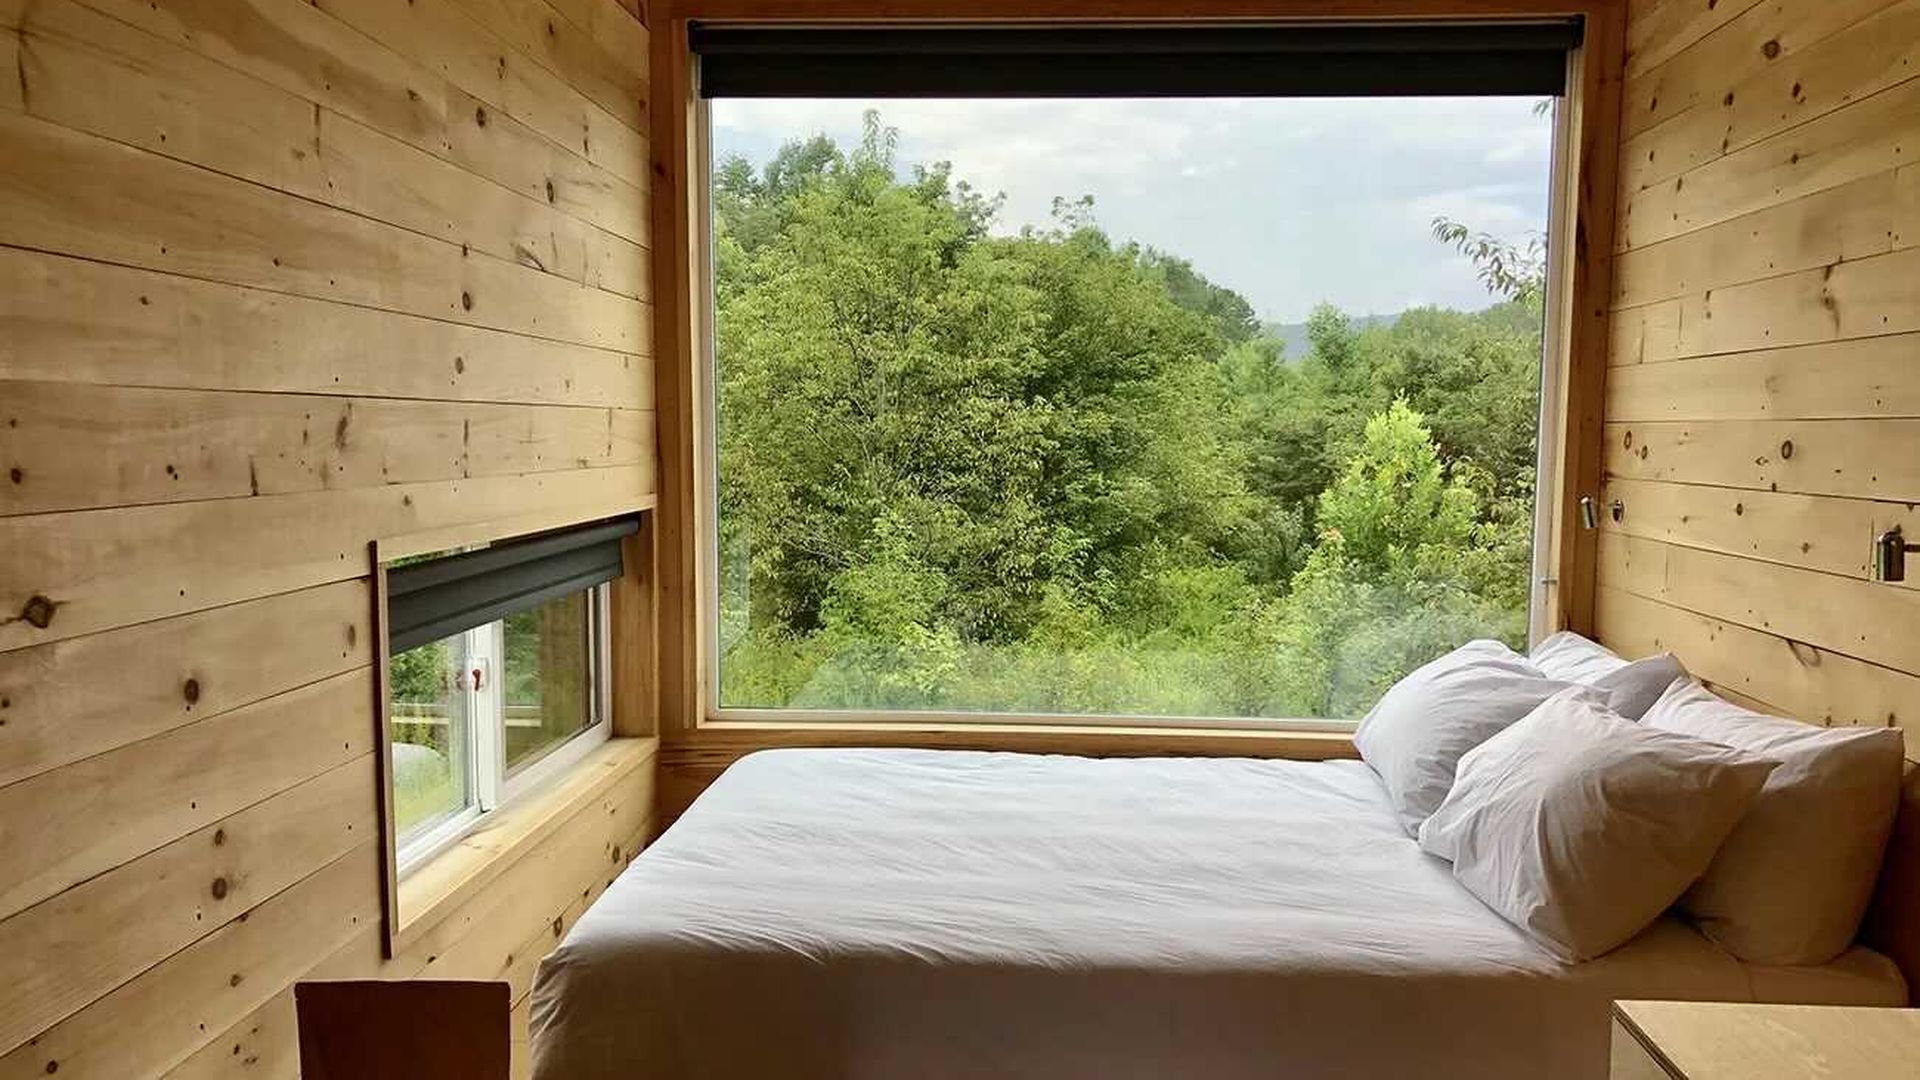 Queen sized bed in front of large window overlooking woods in summer